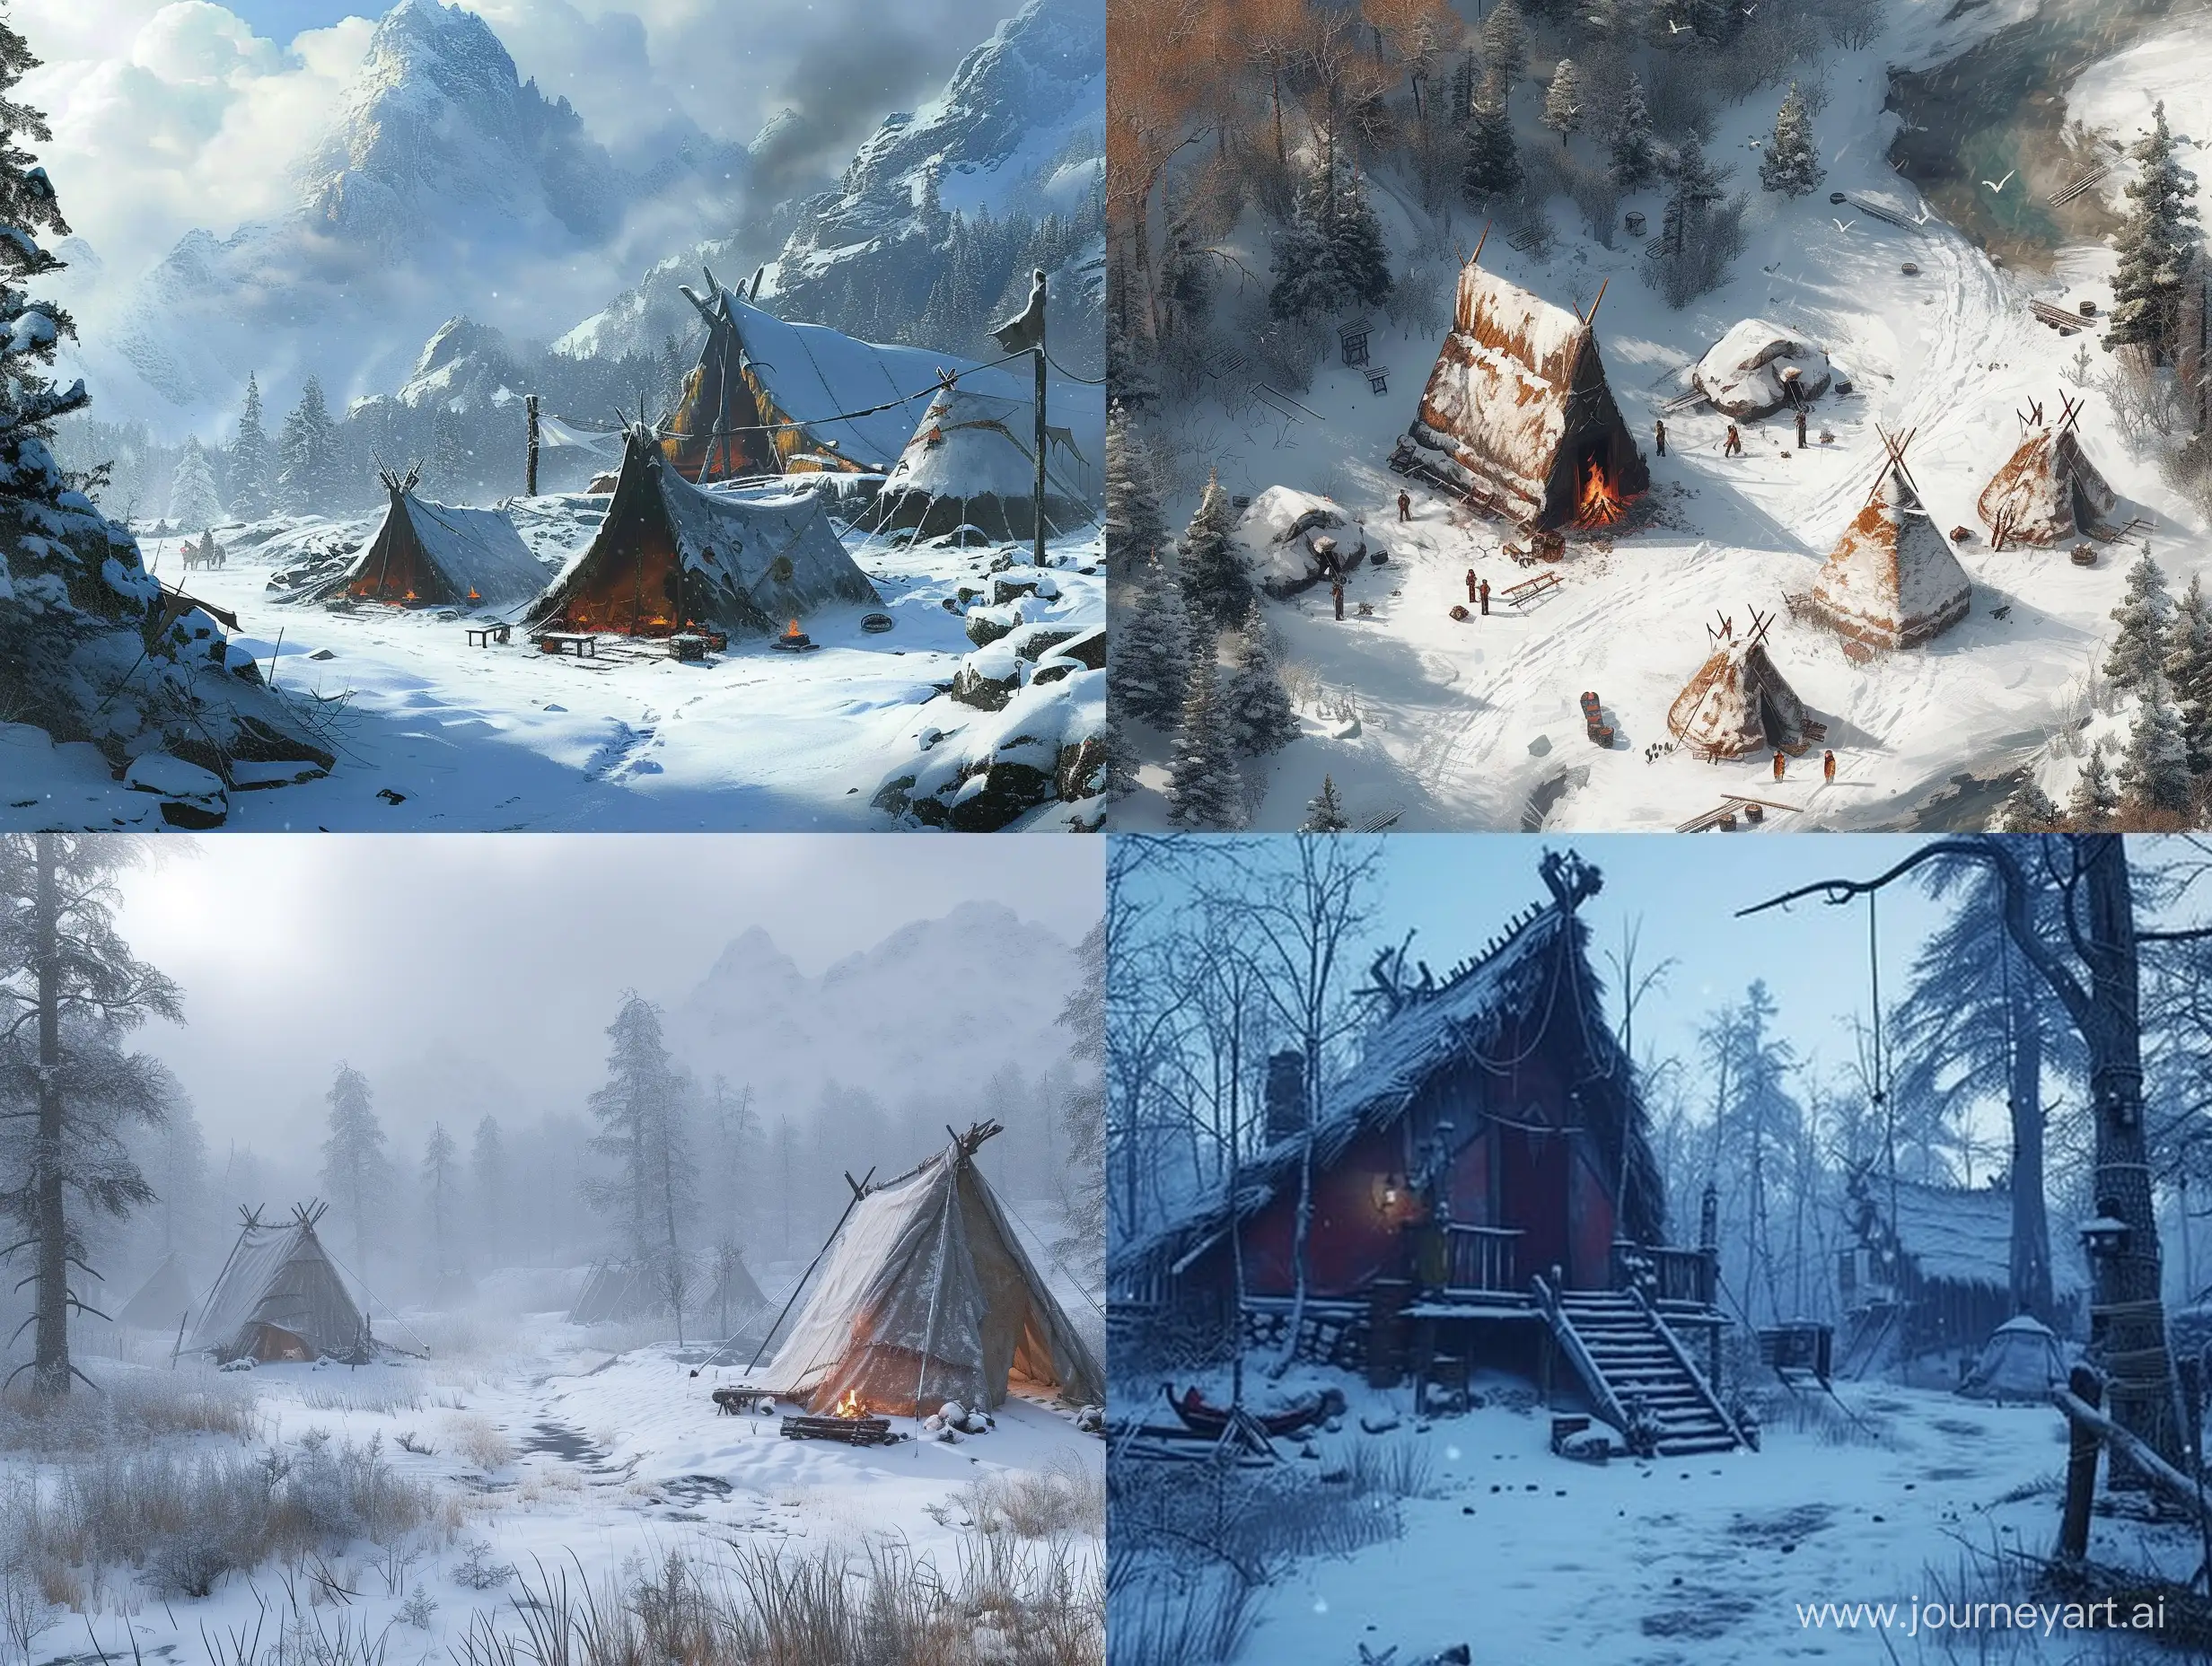 Bandit camp in winter fantasy style